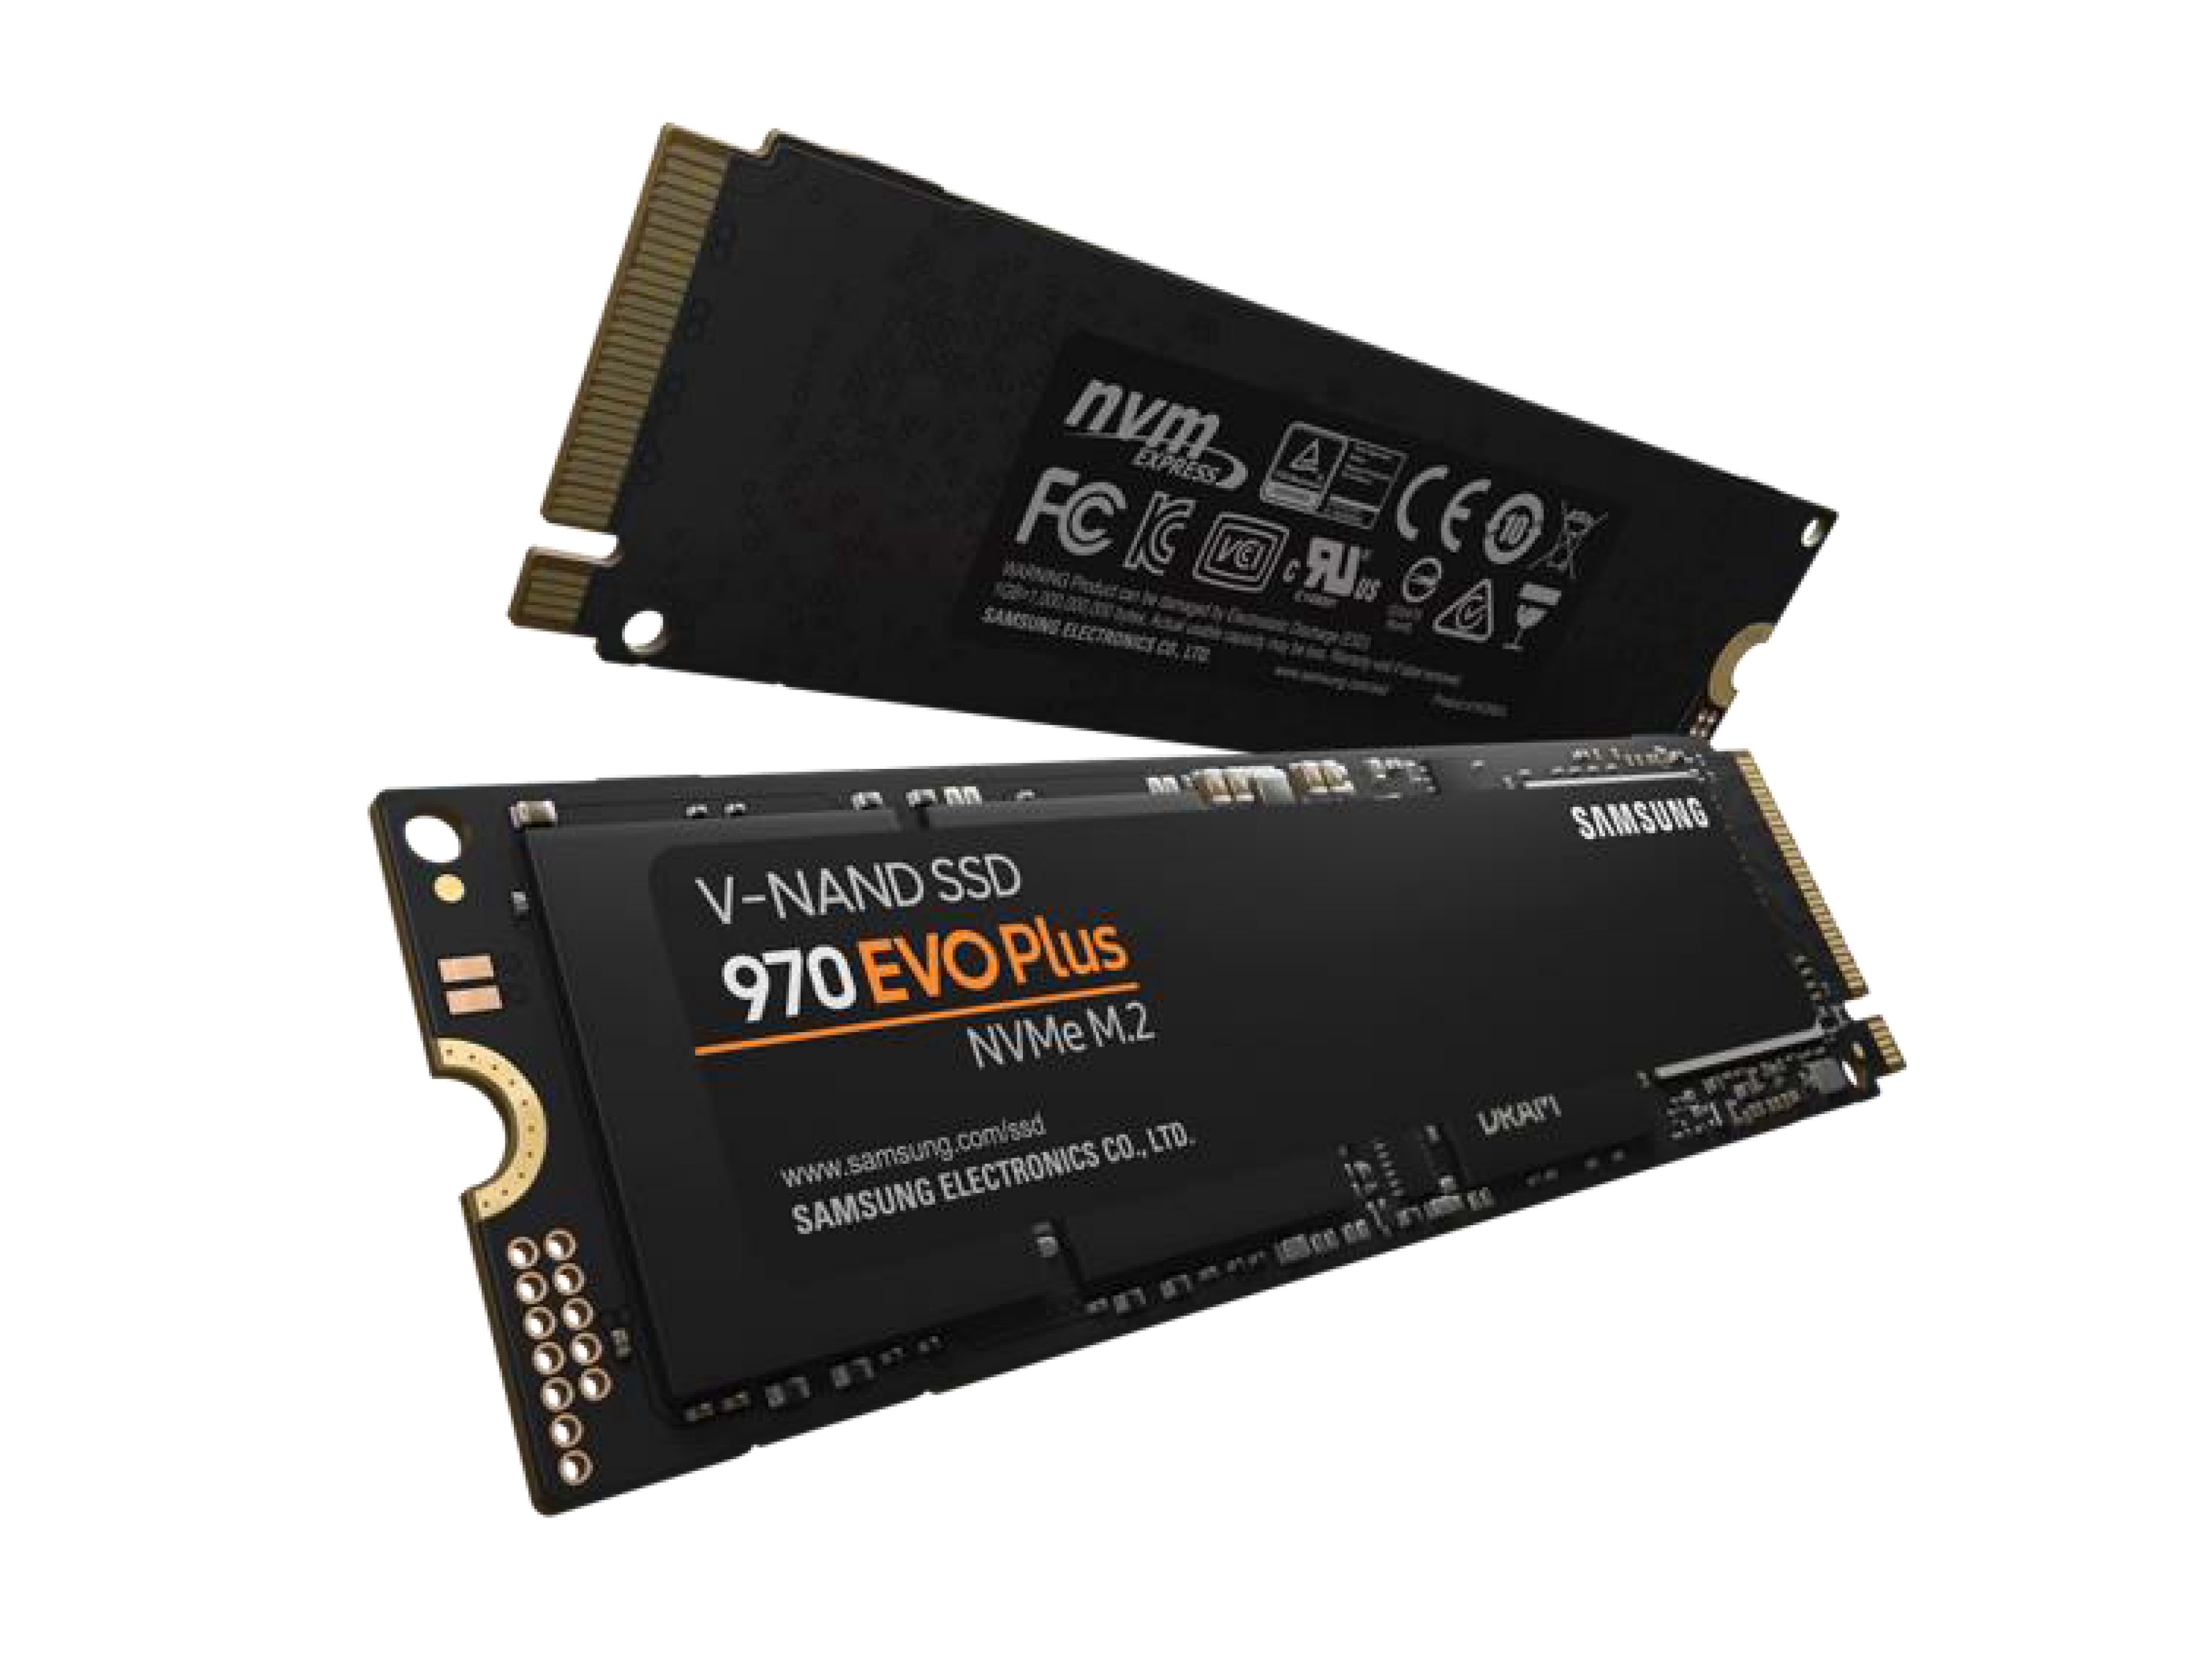 Samsung Launches New 970 Evo and 970 Pro SSDs